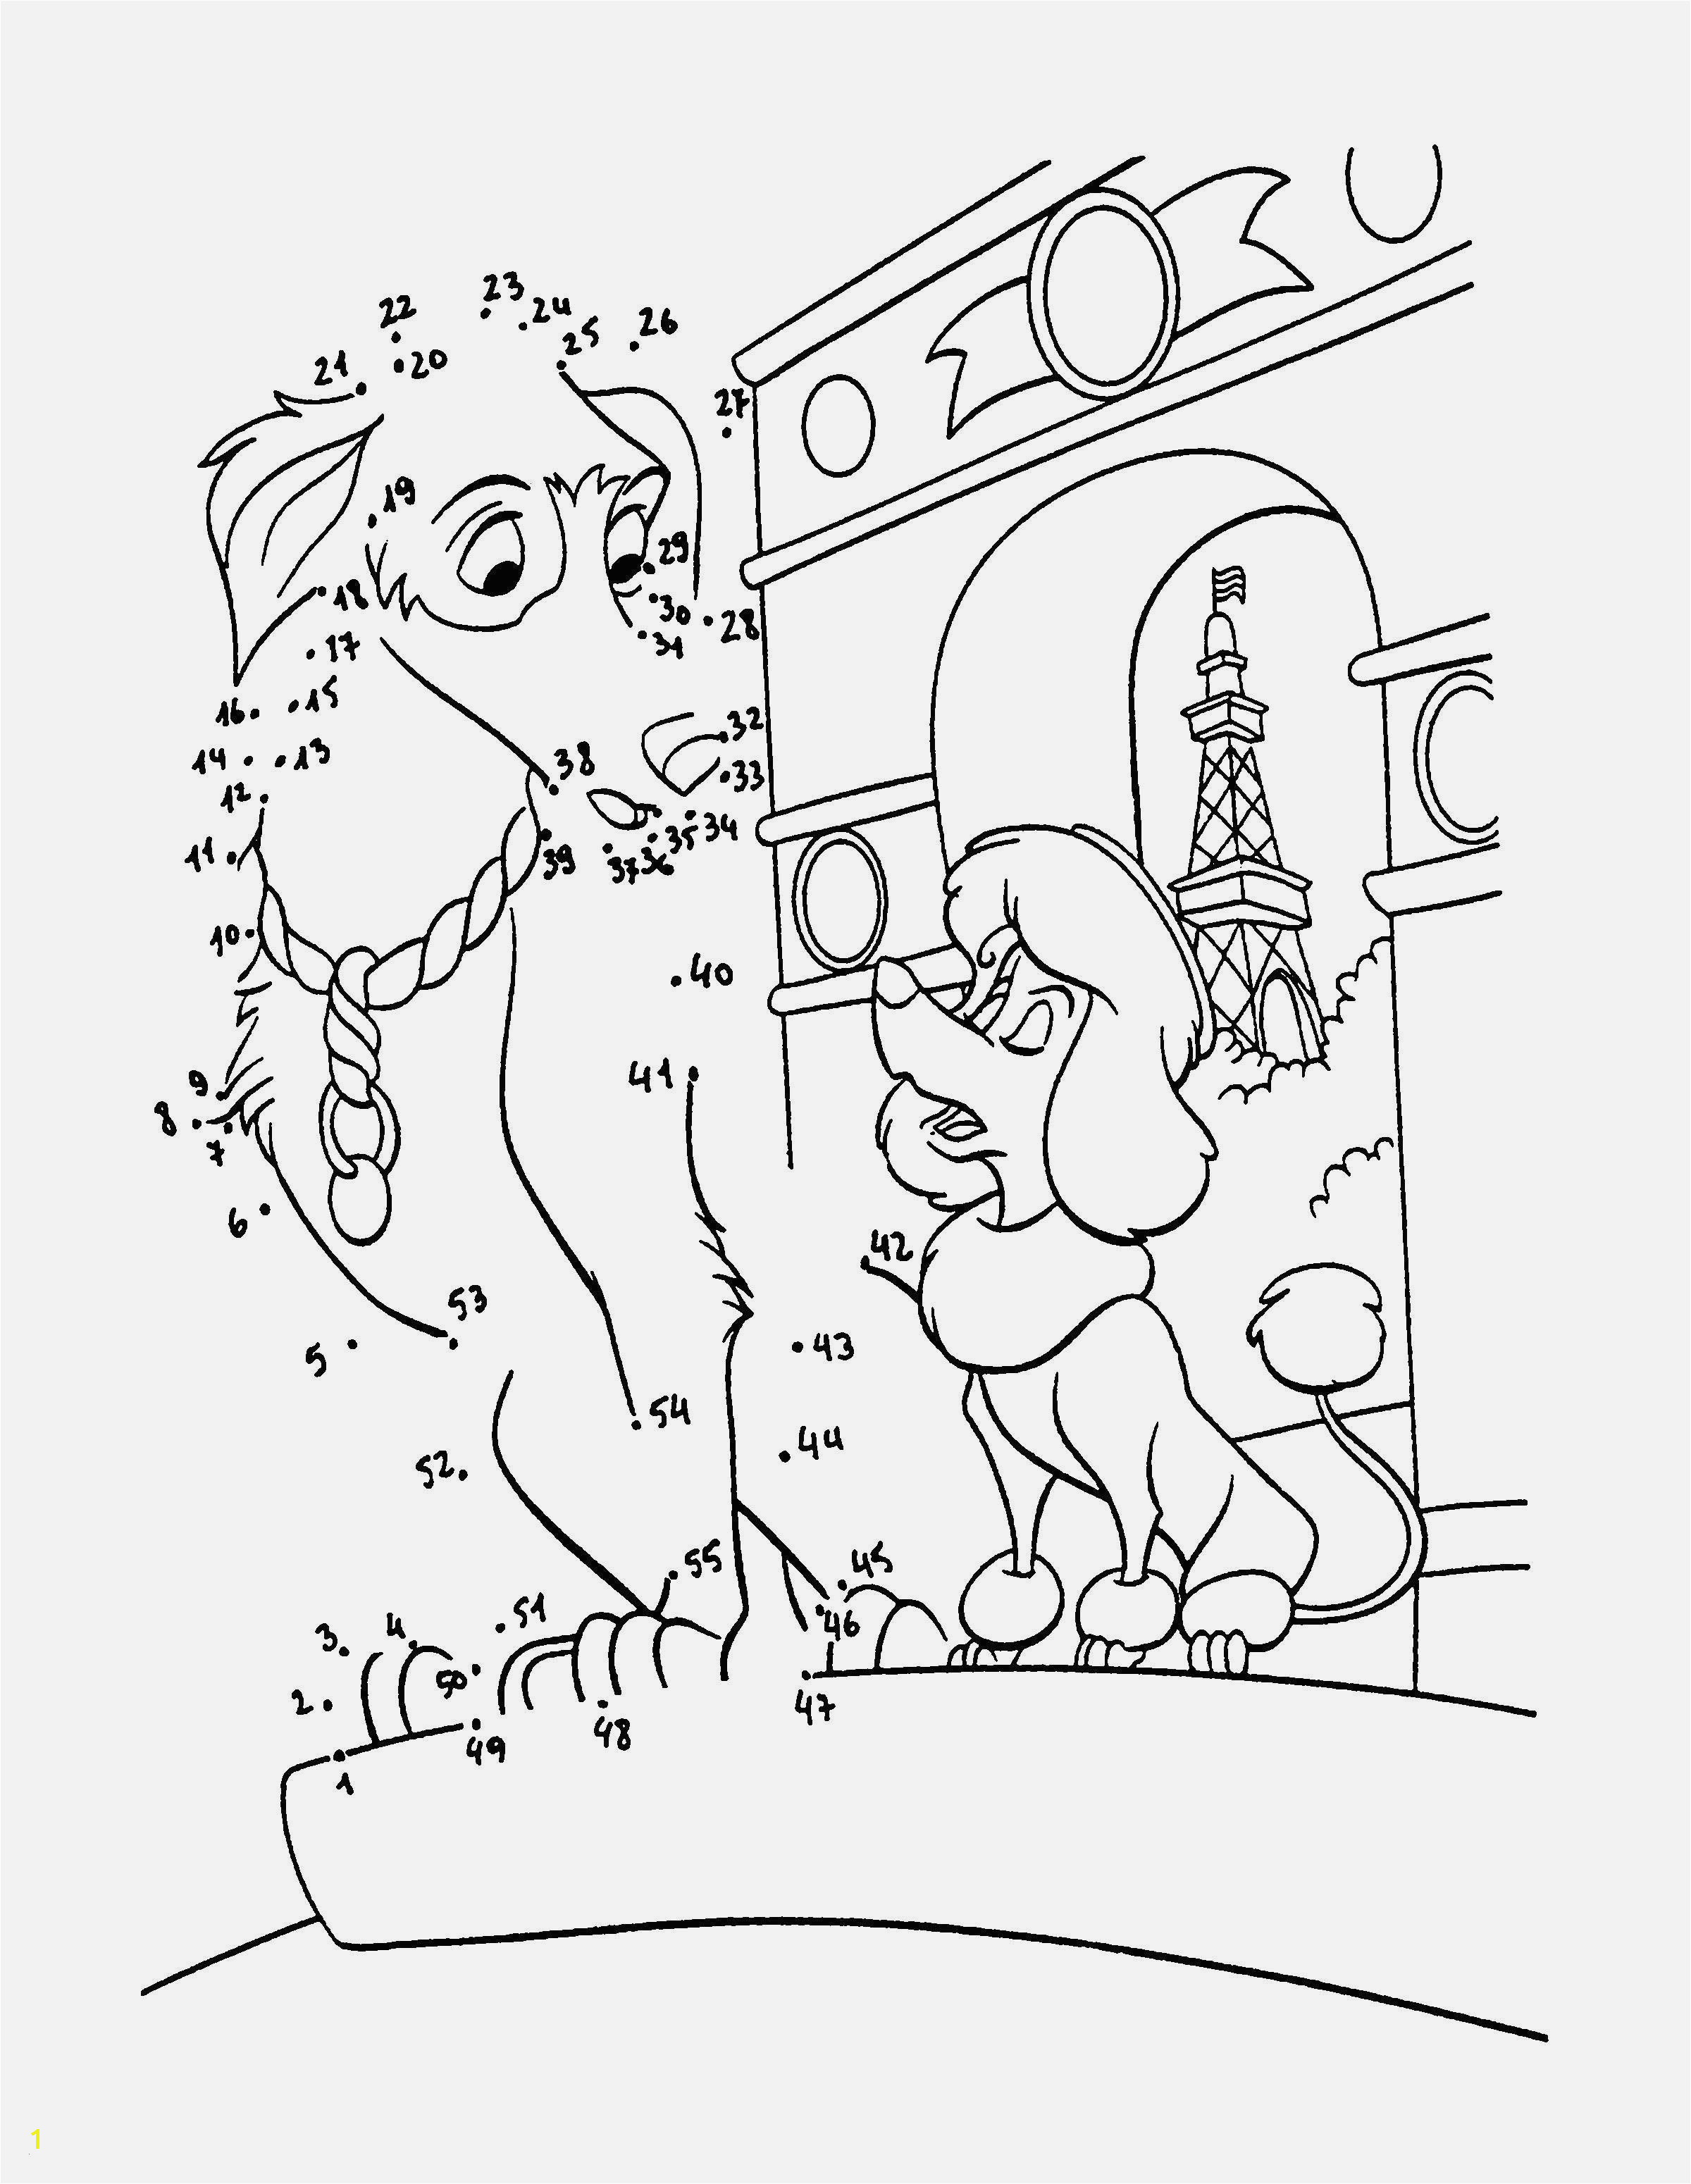 House Pets Coloring Pages Download and Print for Free Coloring Pages Hard